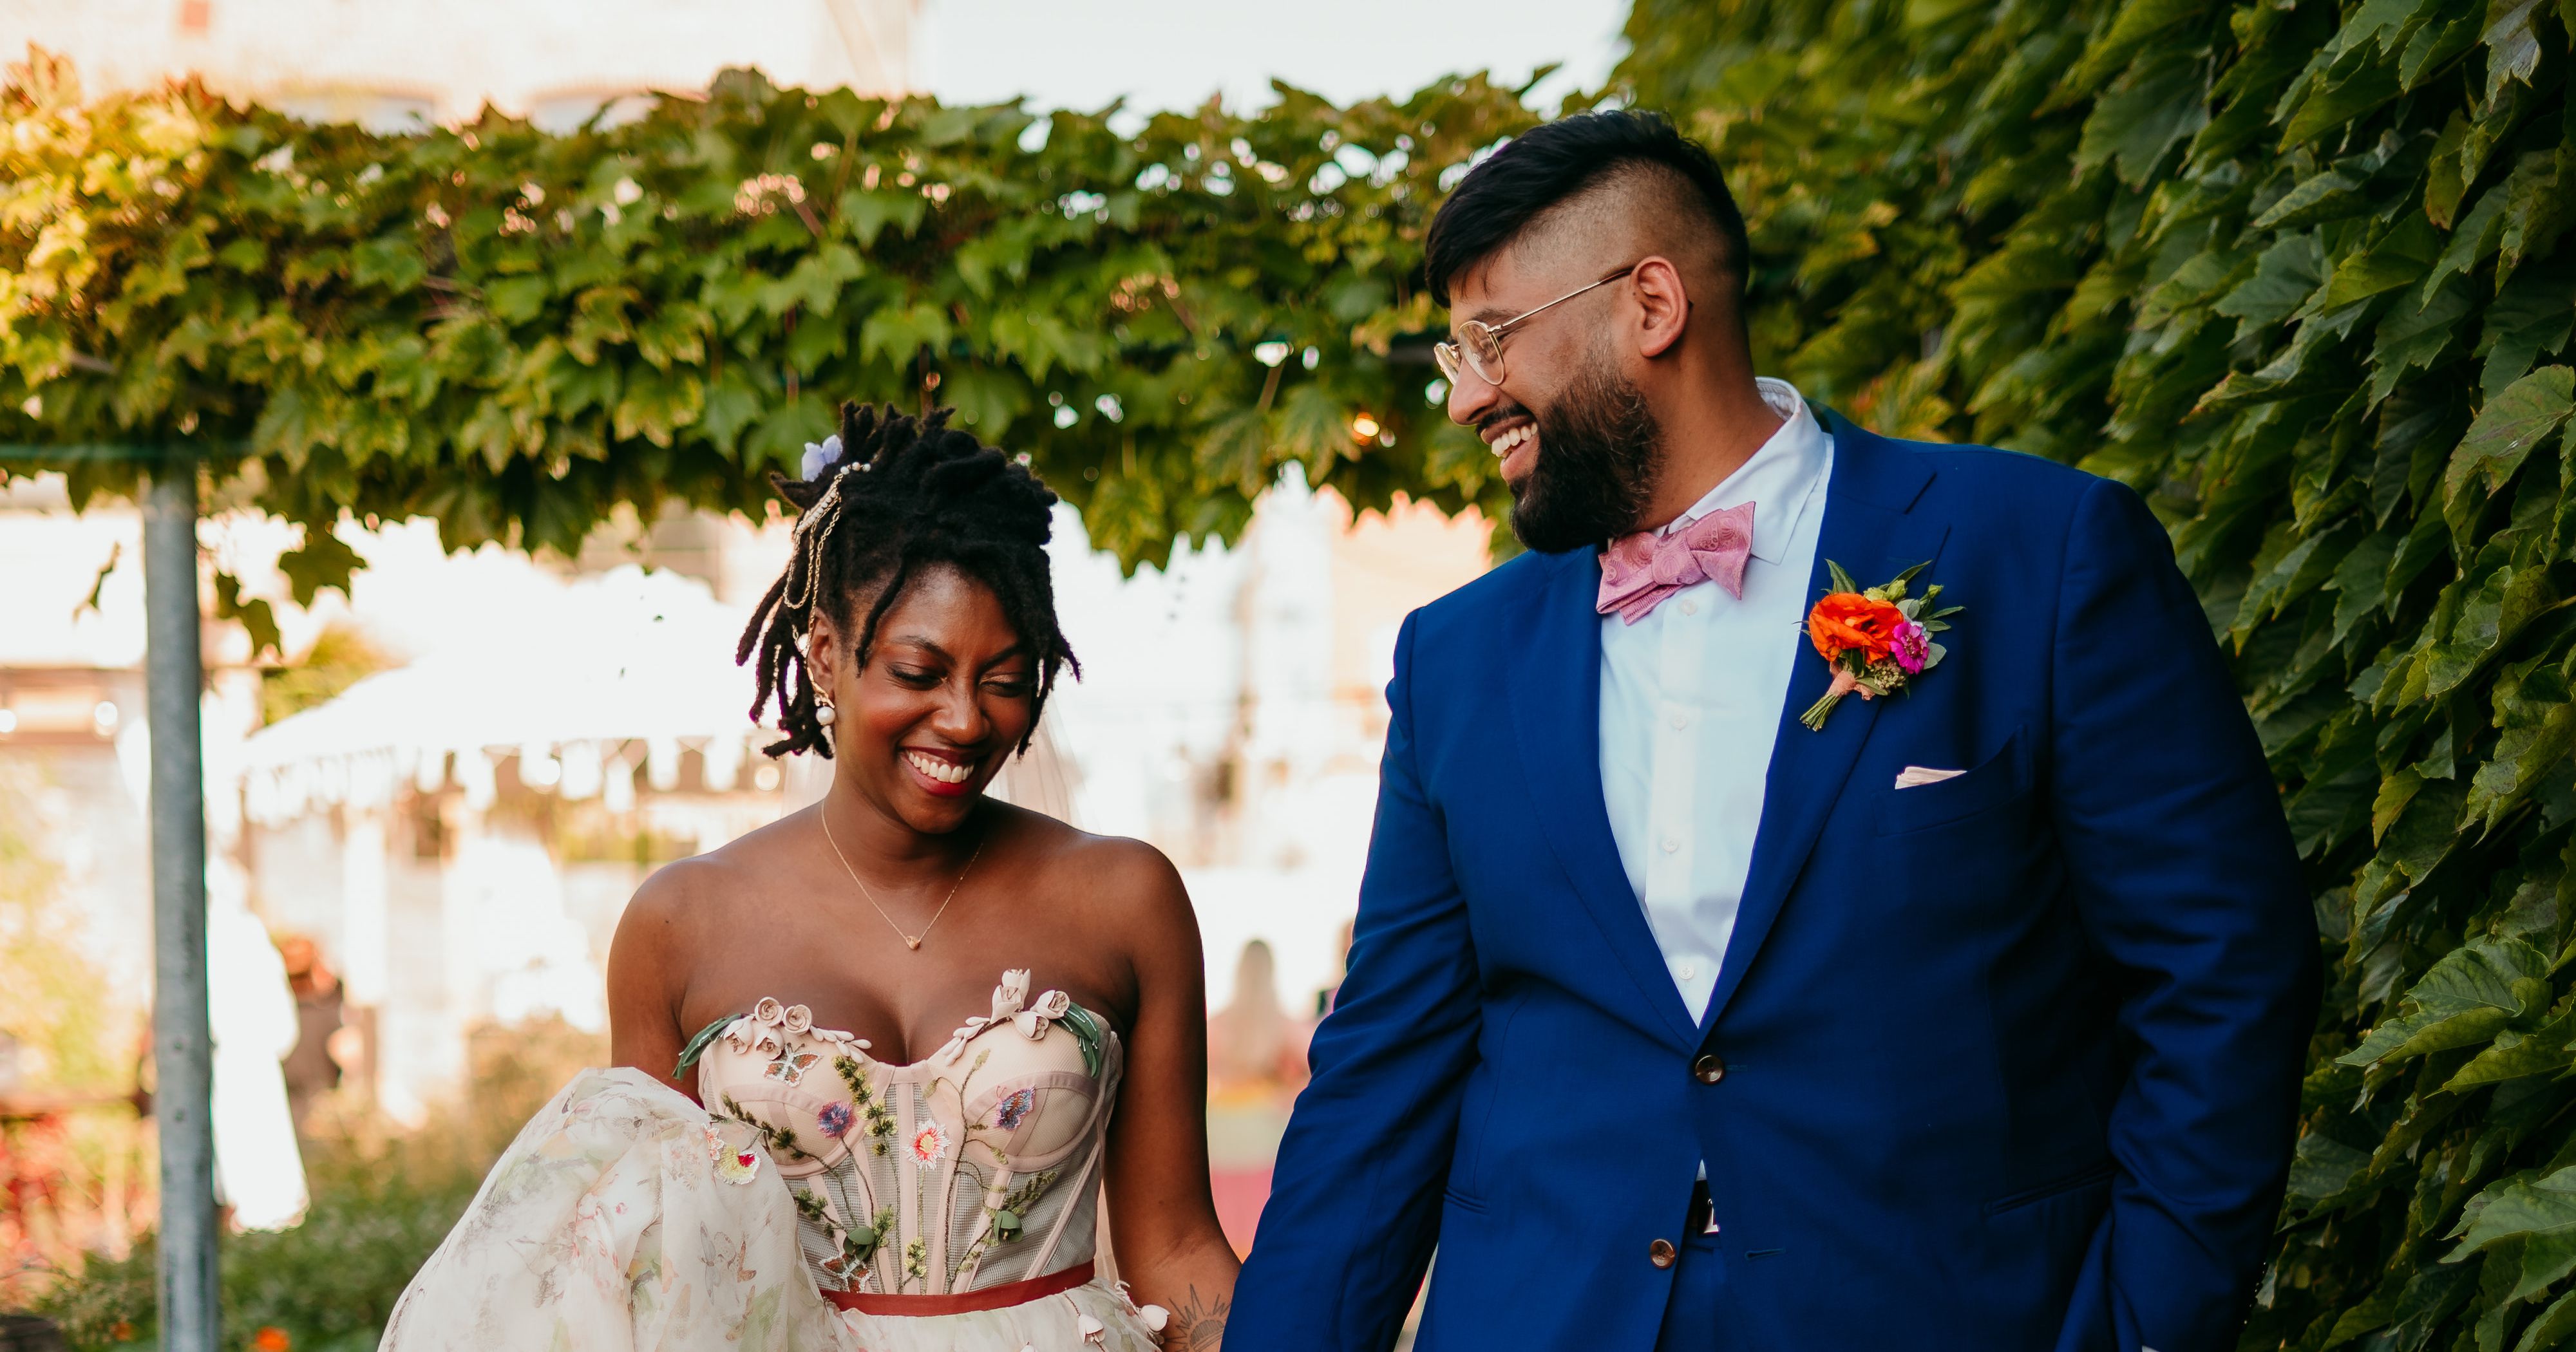 A Tradition-Infused Botanical Wedding at an Urban Farm in Chicago